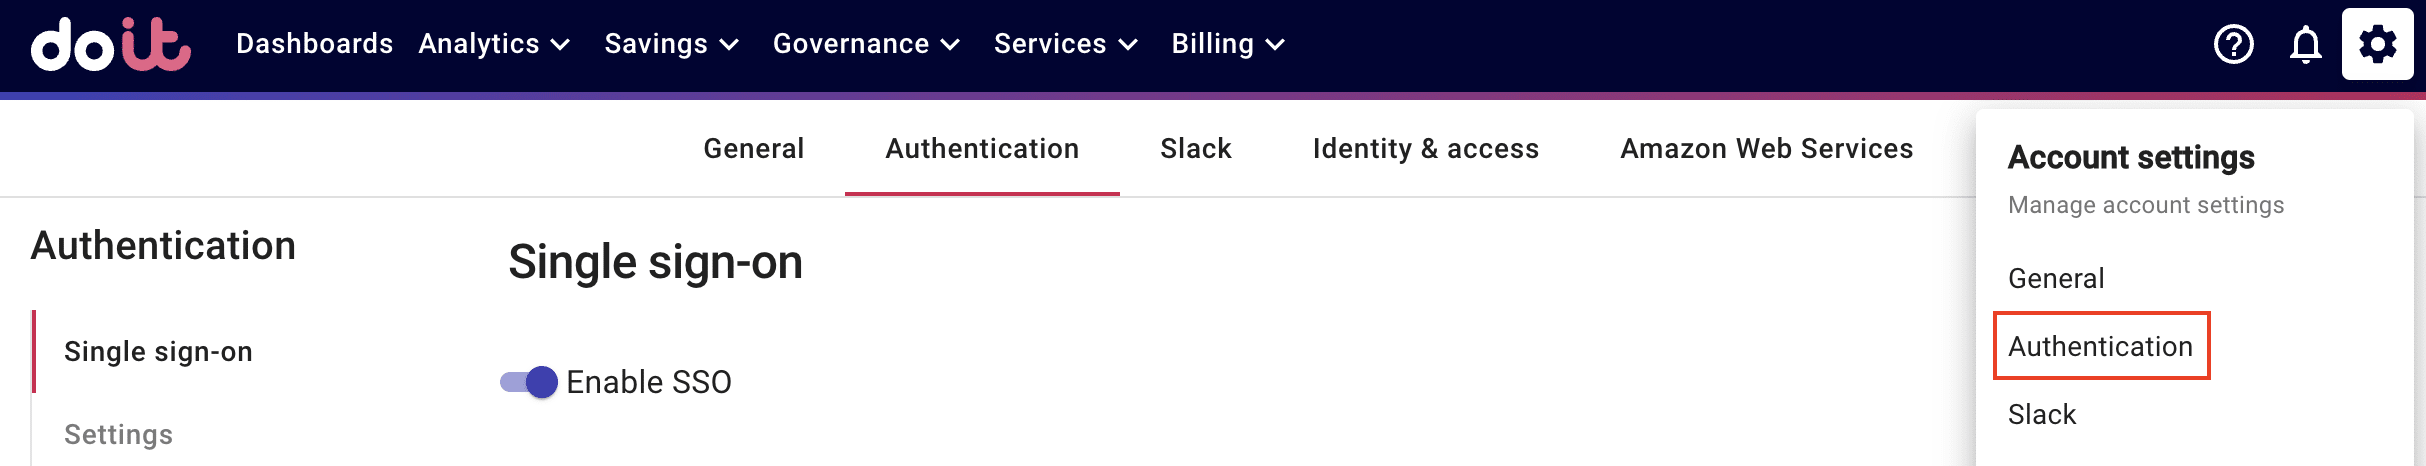 Shows the Slack option in Account Settings